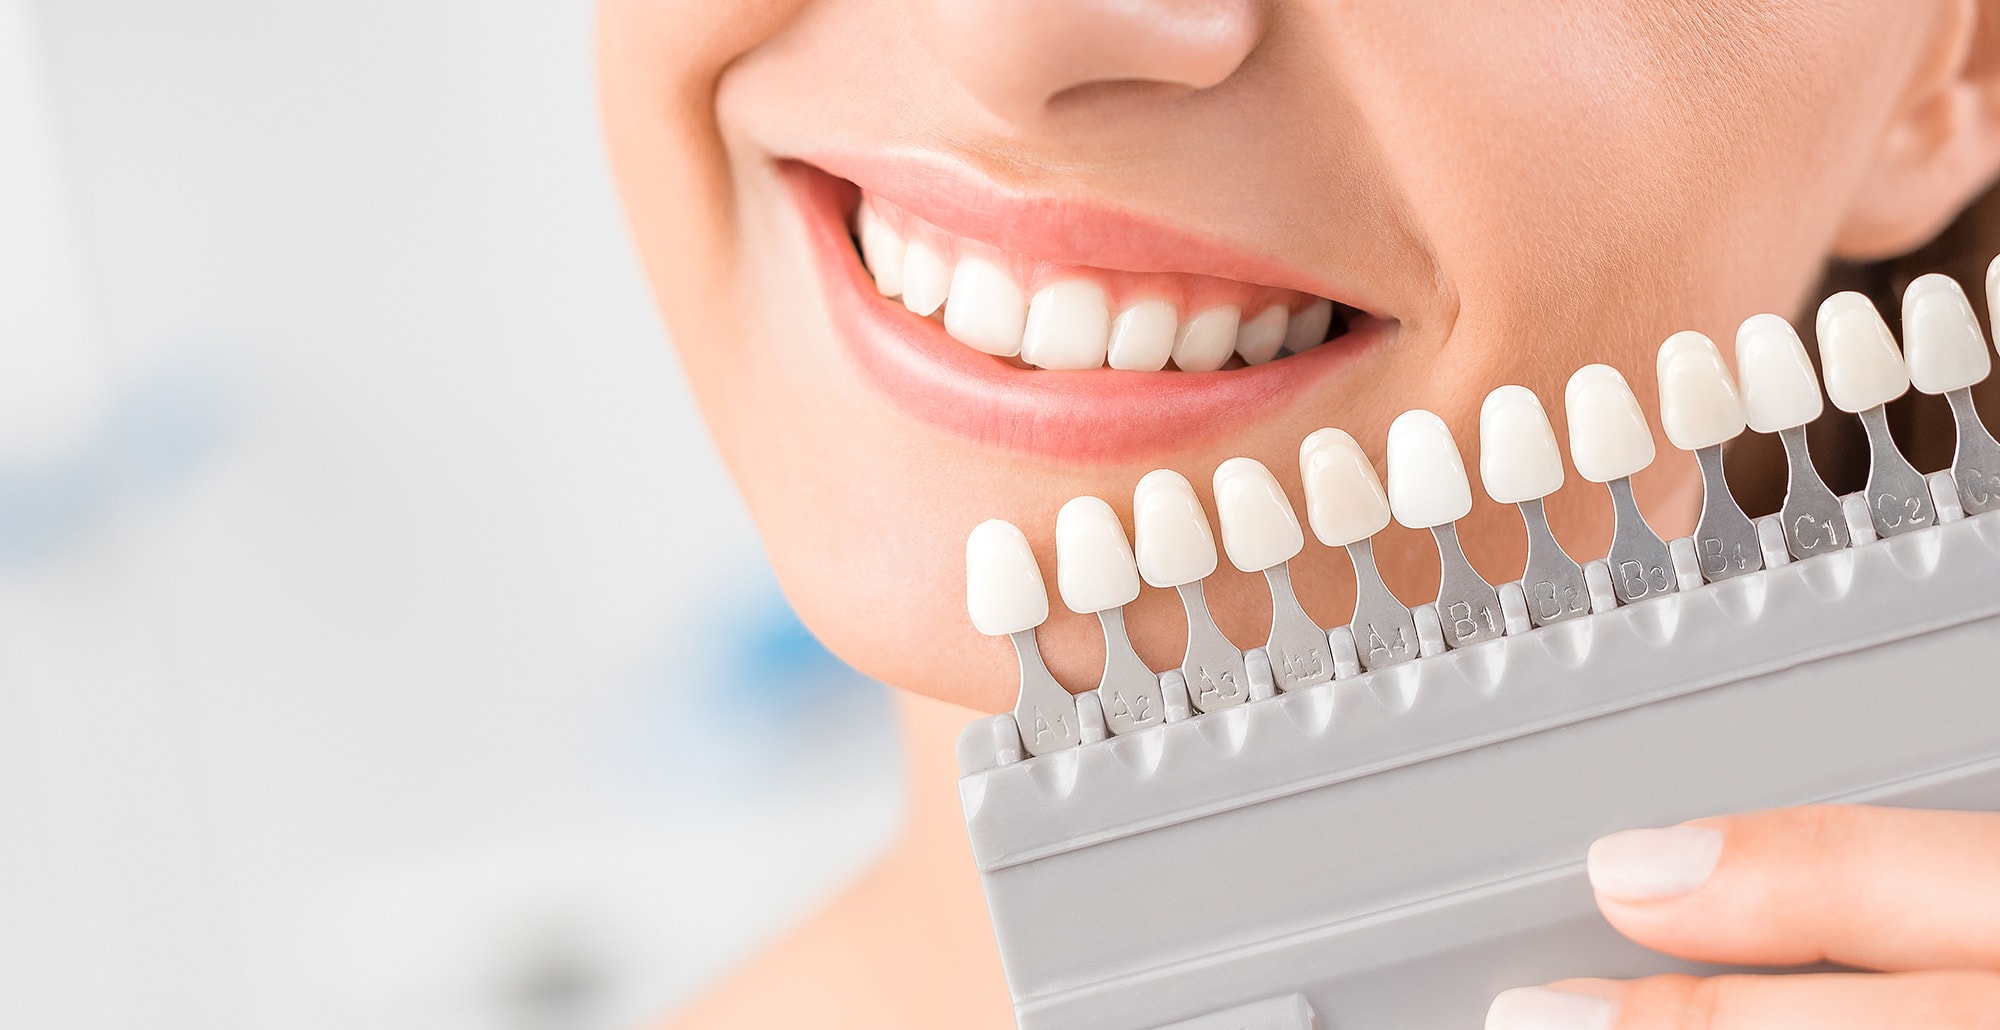 A woman holding up a tooth shade guide wondering how to keep teeth white while she has orthodontic treatment